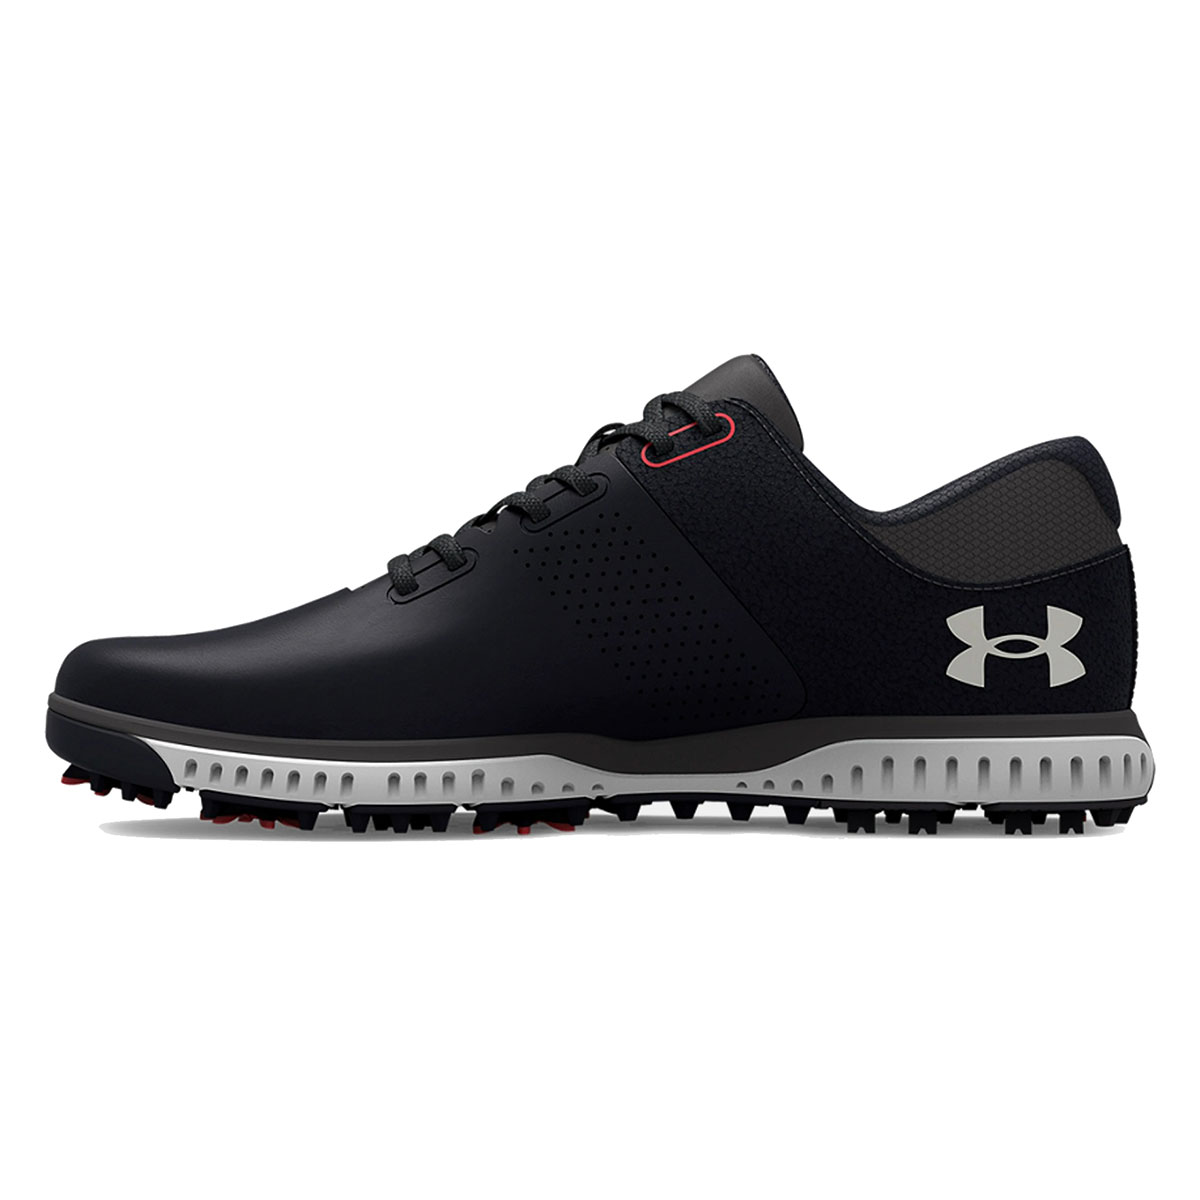 Under Armour Men's Medal RST Waterproof Spiked Golf Shoes from american ...